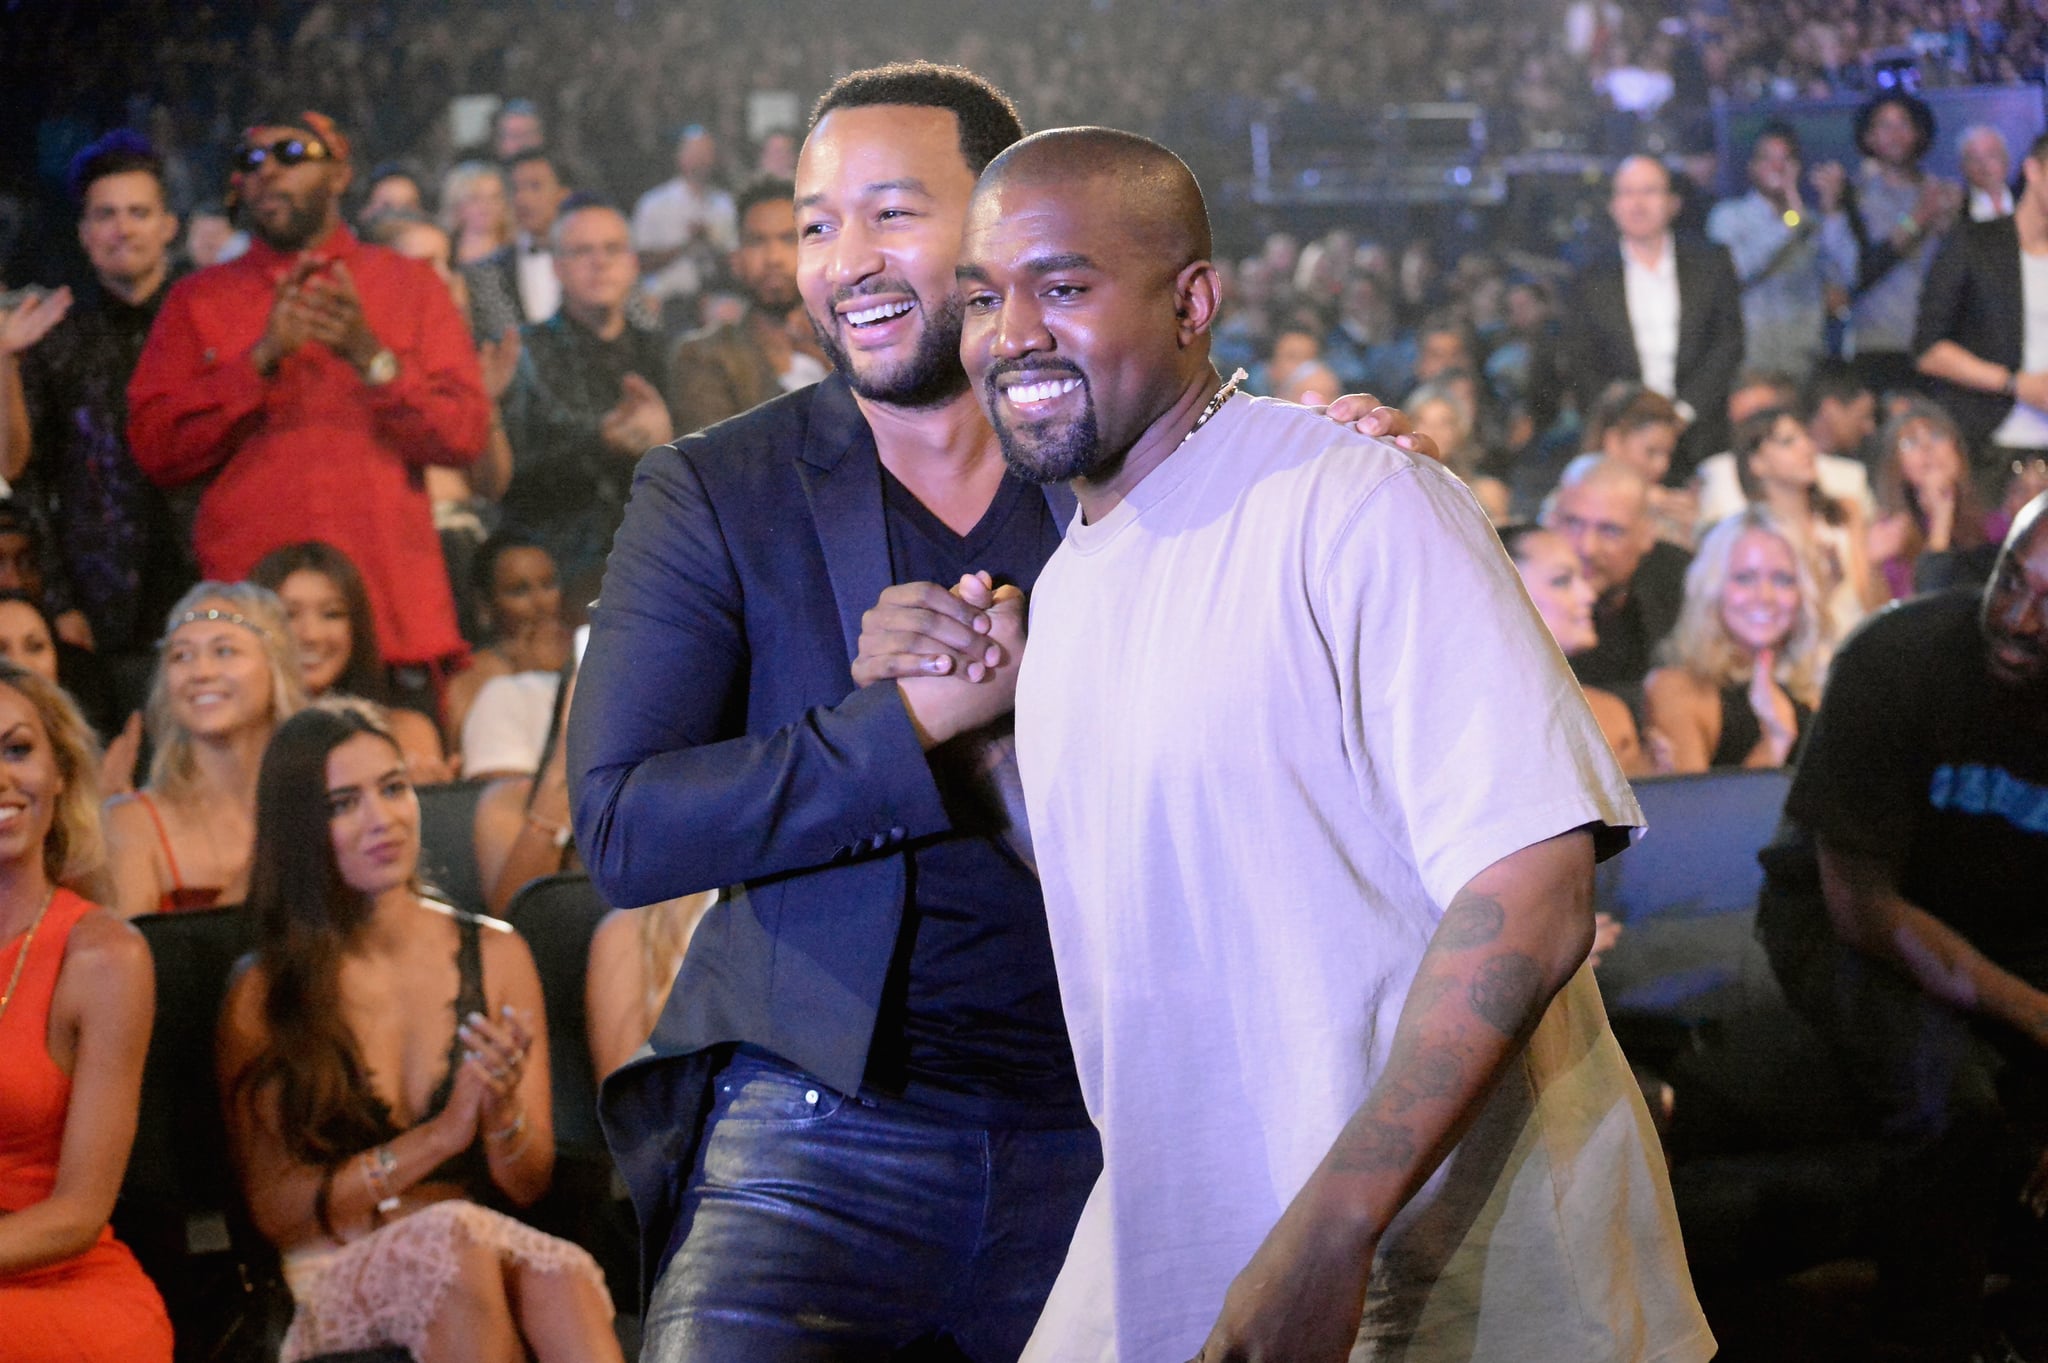 LOS ANGELES, CA - AUGUST 30:  Recording artists John Legend (L) and Kanye West attend the 2015 MTV Video Music Awards at Microsoft Theatre on August 30, 2015 in Los Angeles, California.  (Photo by Jeff Kravitz/MTV1415/FilmMagic)